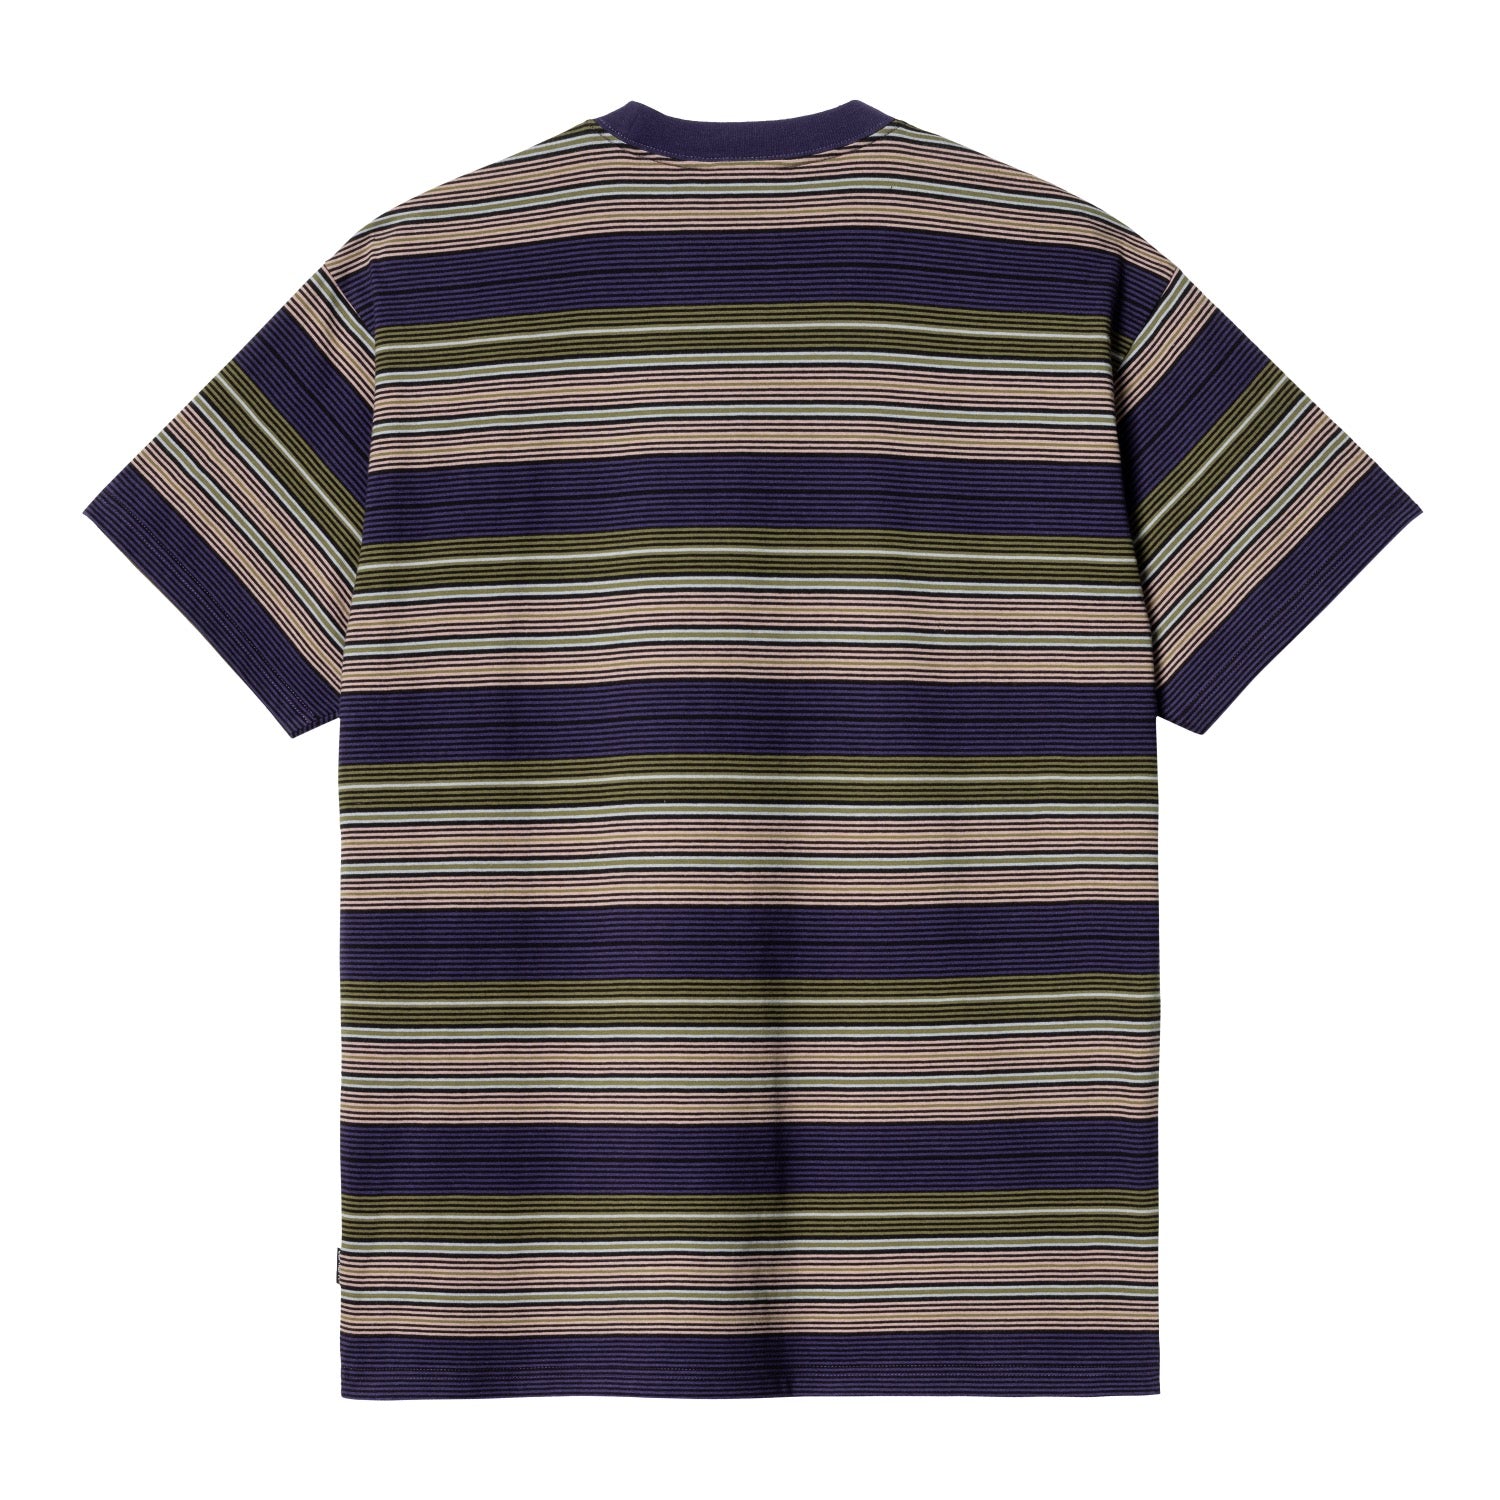 S/S COBY T-SHIRT - Coby Stripe, Tyrian